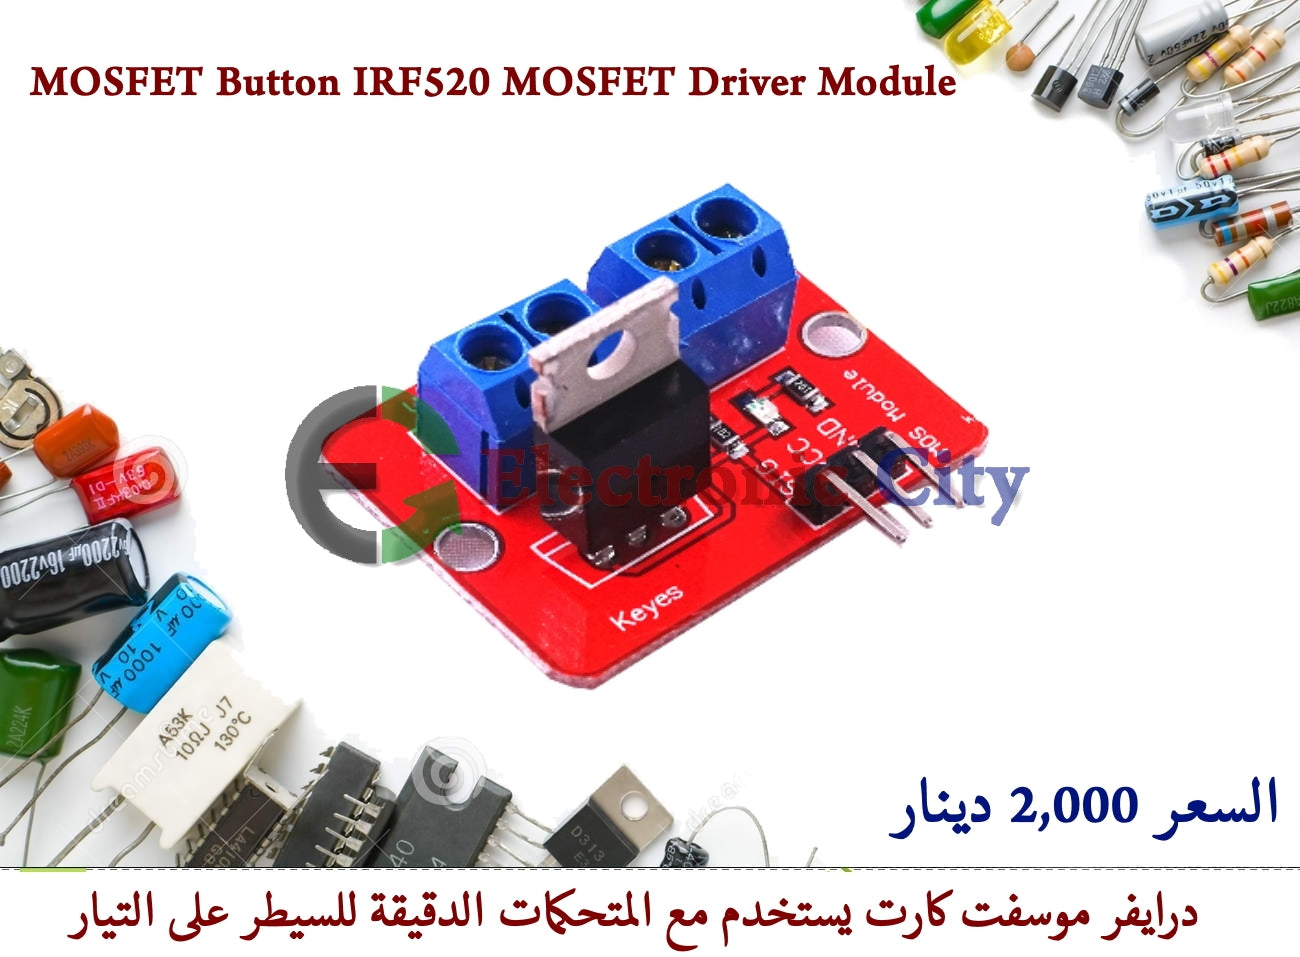 MOSFET Button IRF520 MOSFET Driver Module #S8 010545